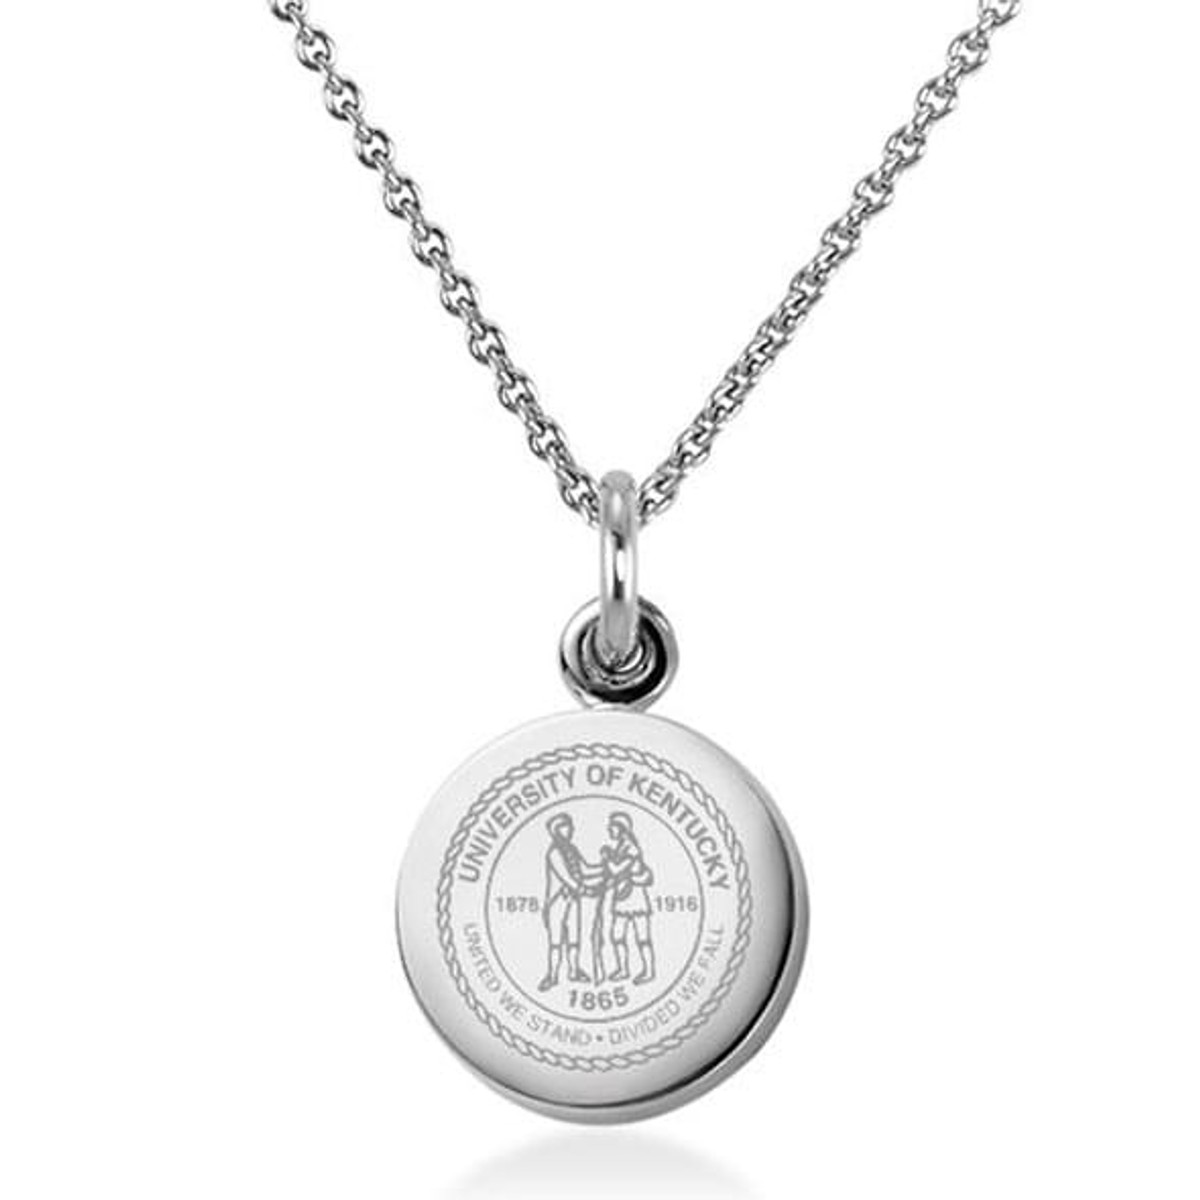 Solid 925 Sterling Silver with Gold-Toned University of Kentucky L Pendant in Circle